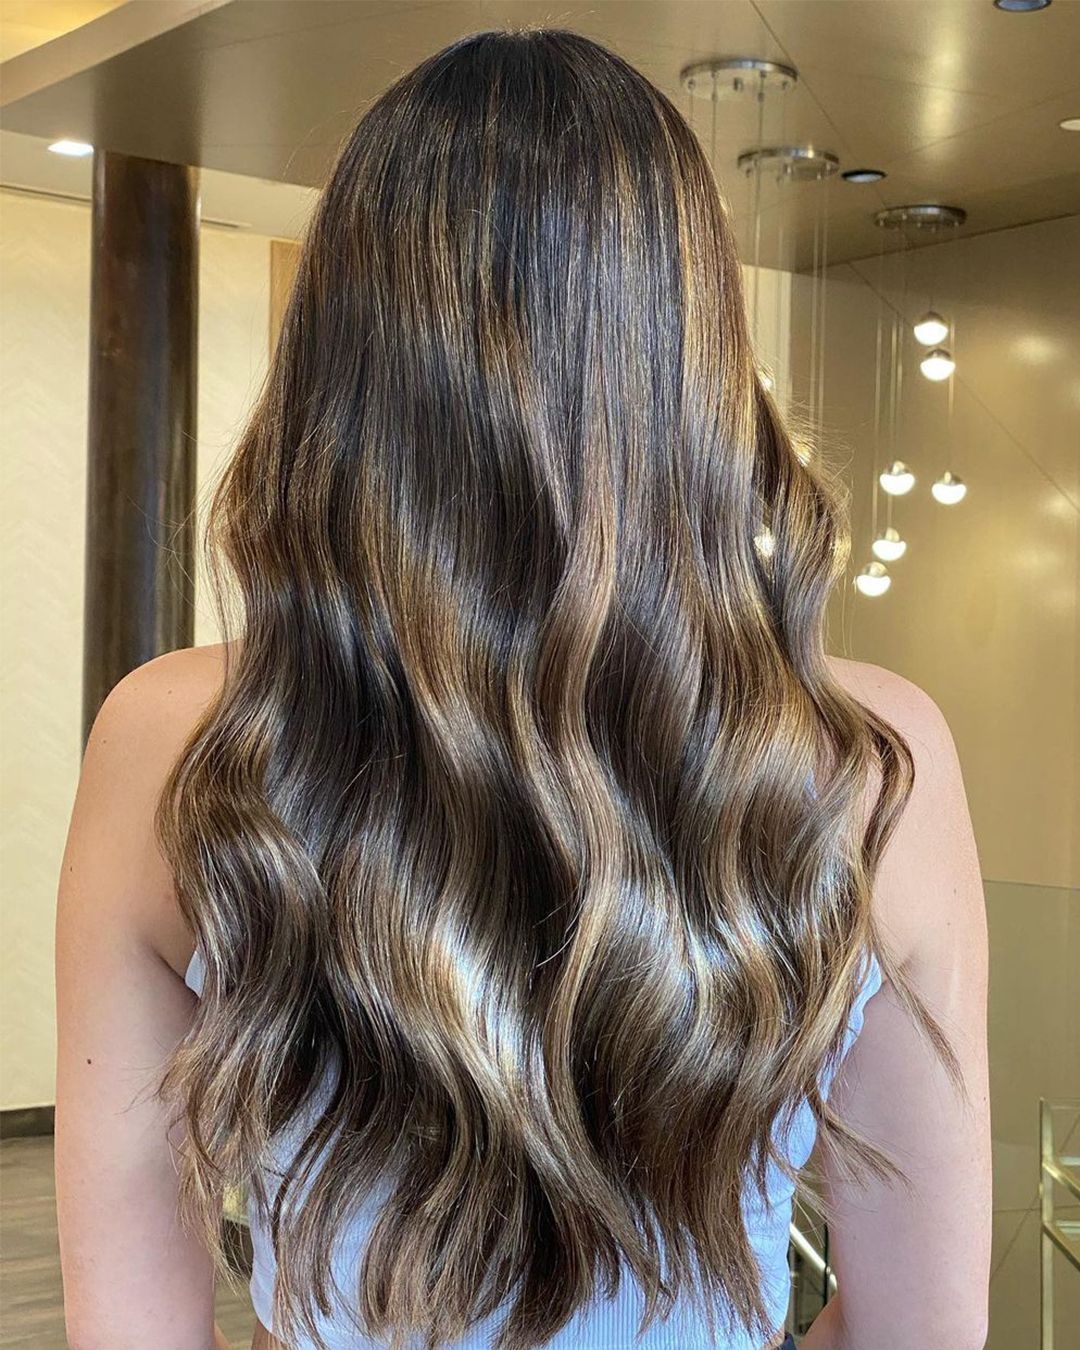 Glam Seamless Hair Extensions + How to Root Shade Them! 